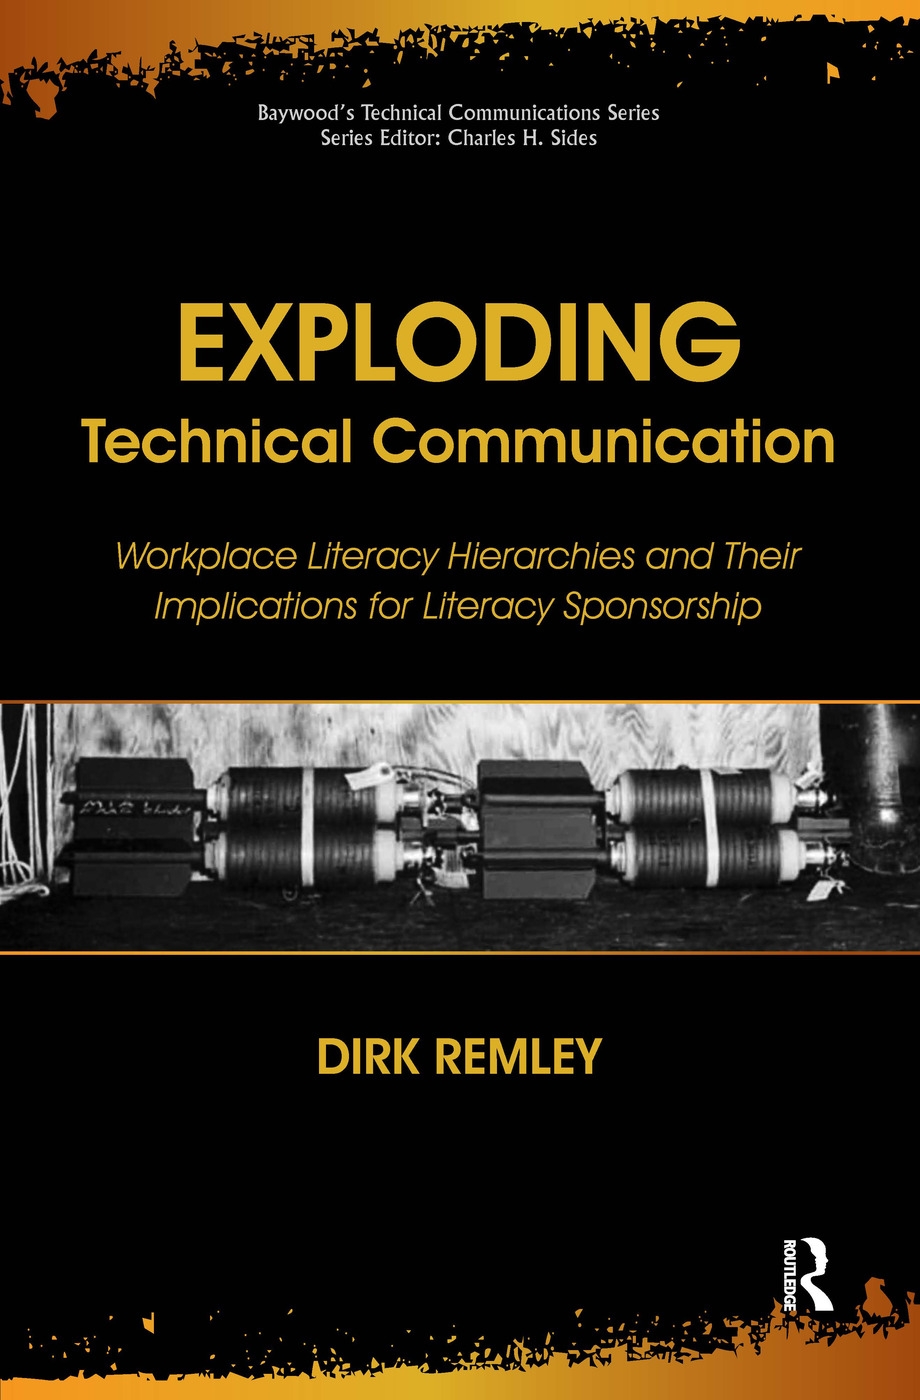 Exploding Technical Communication: Workplace Literacy Hierarchies and Their Implications for Literacy Sponsorship